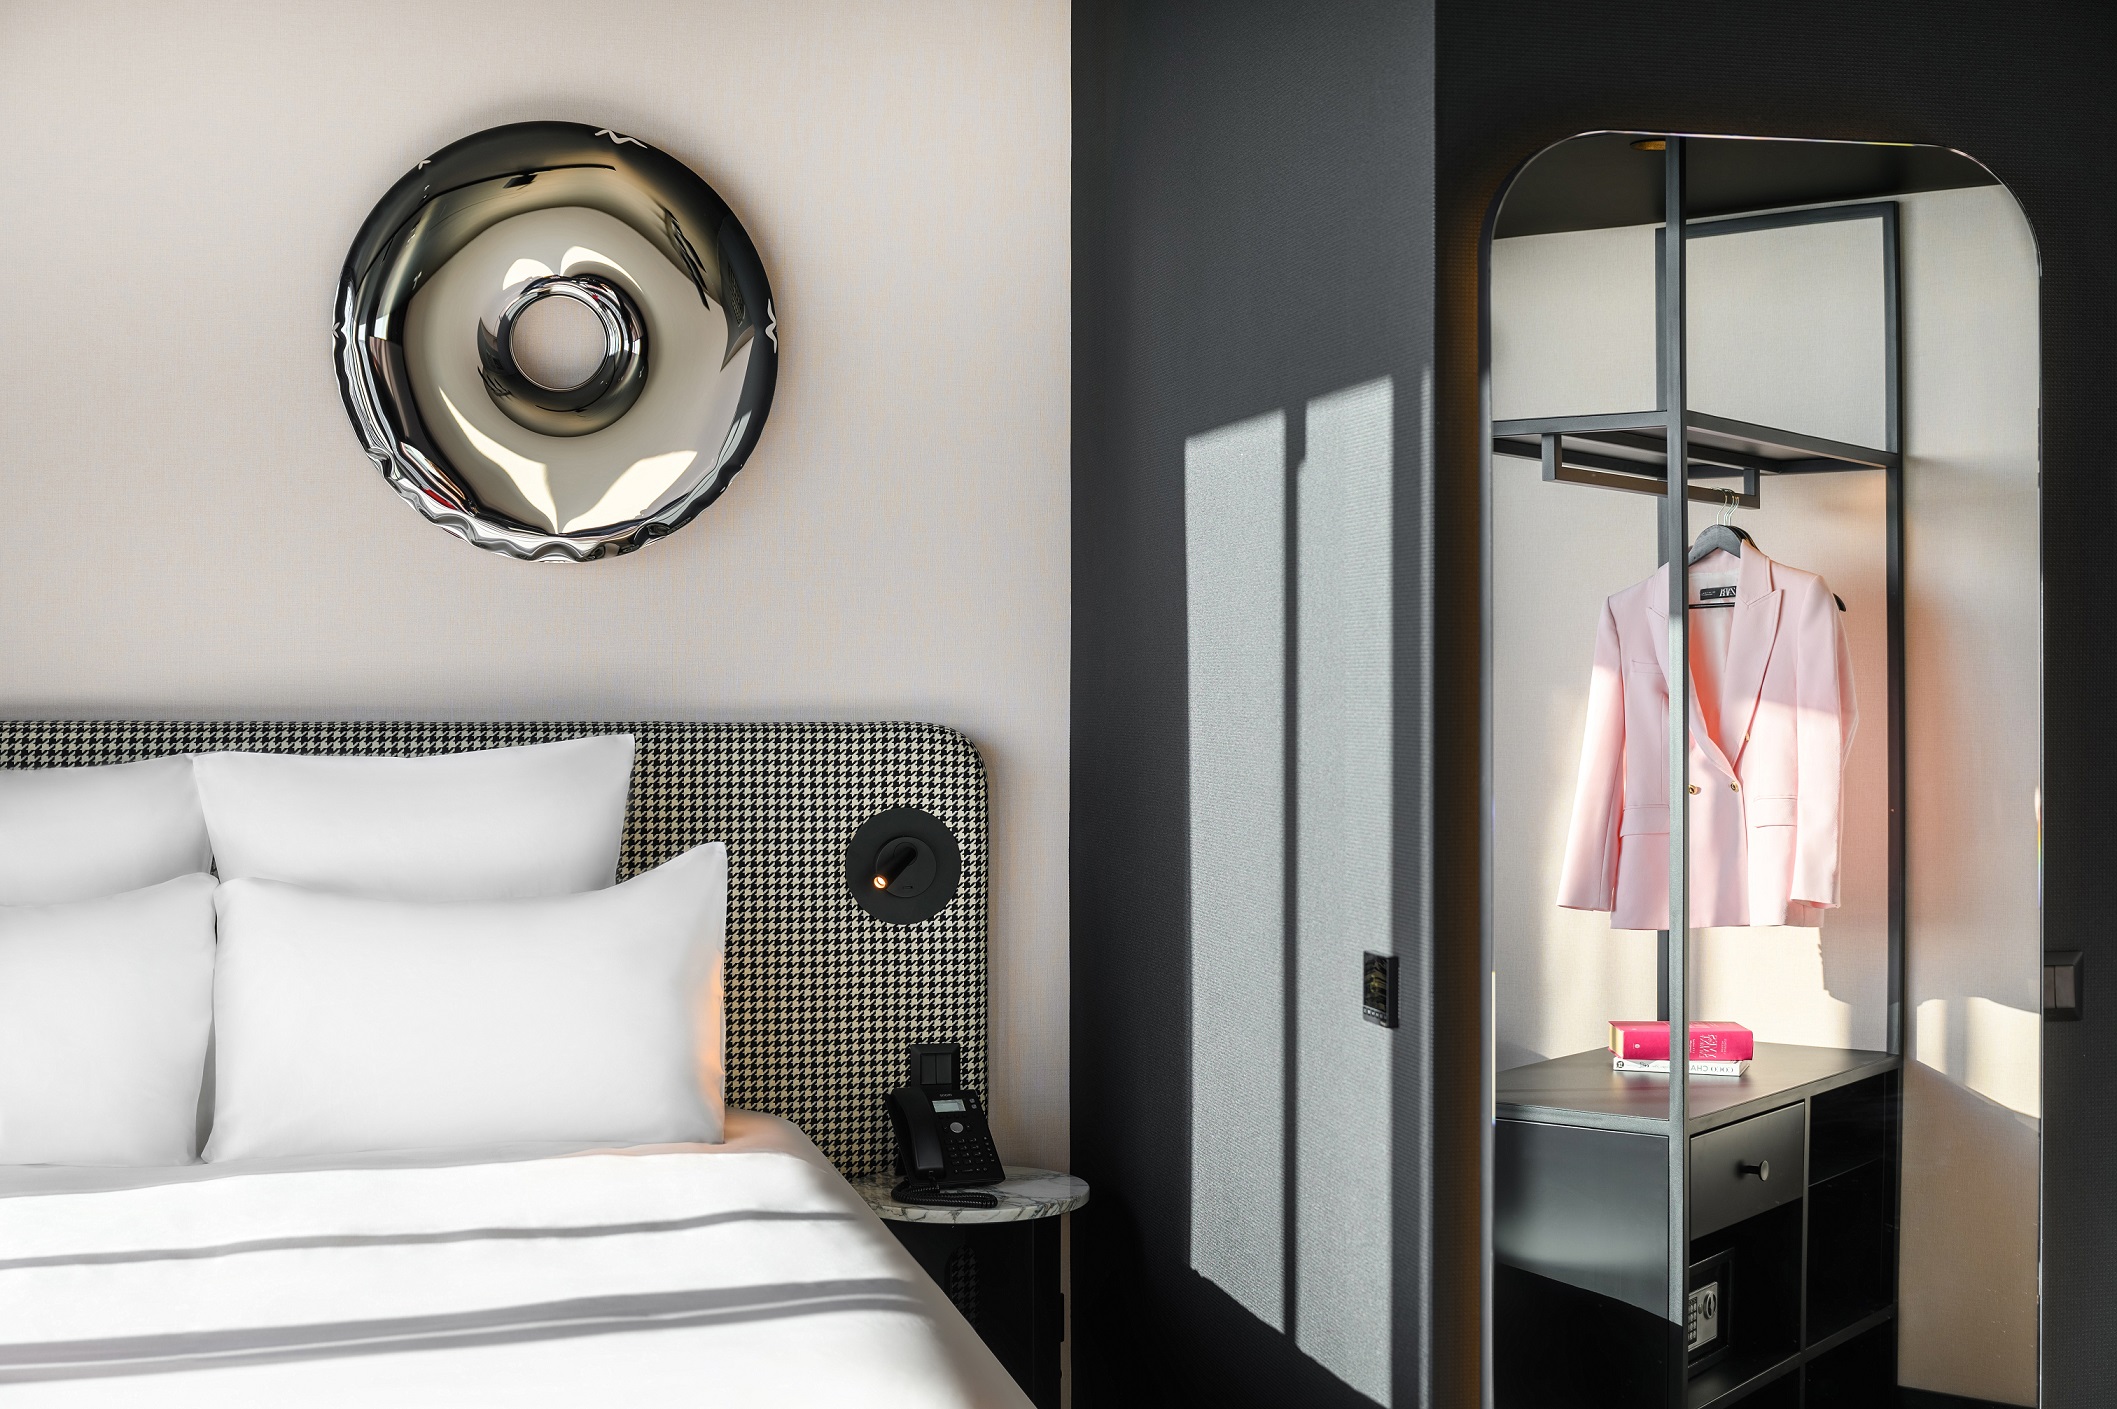 TRIBE Hotel Budapest Stadium, developed by WING, was awarded in three categories at LIV Hospitality Design Awards